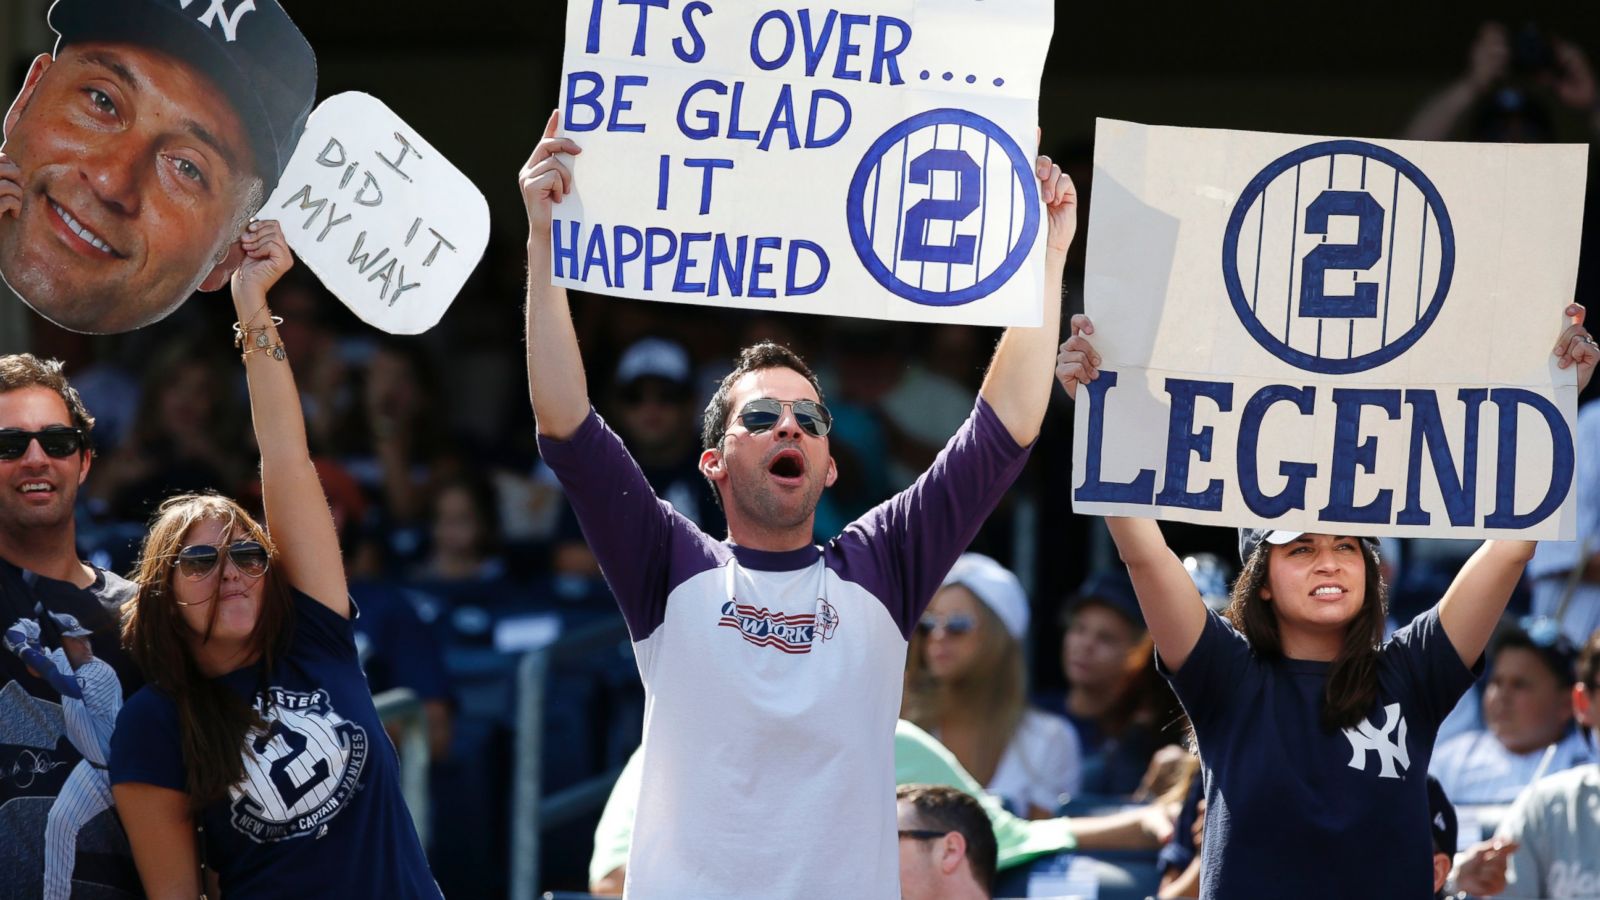 This Is How Baseball Fans Have Said Goodbye to Yankees Shortstop Derek Jeter  - ABC News